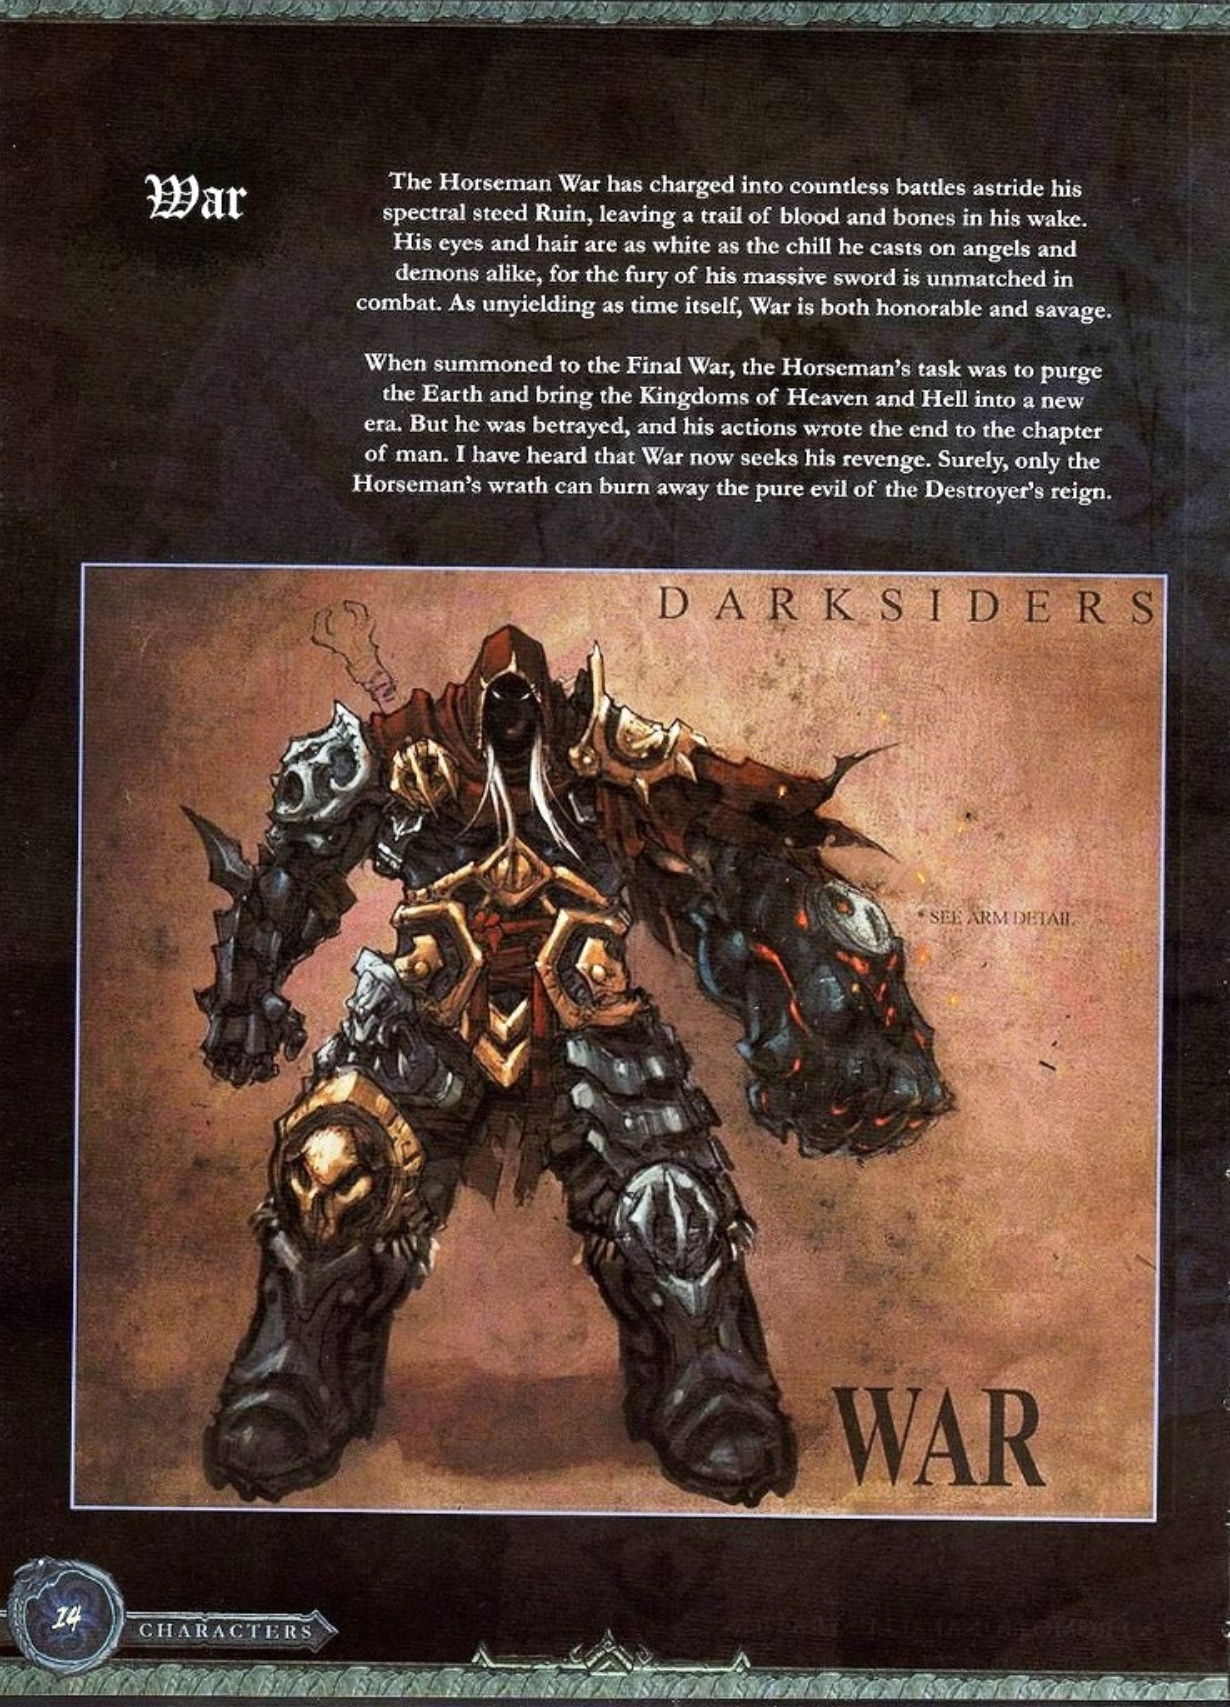 The Art of Darksiders (low-res, missing pages, and watermarked) 13